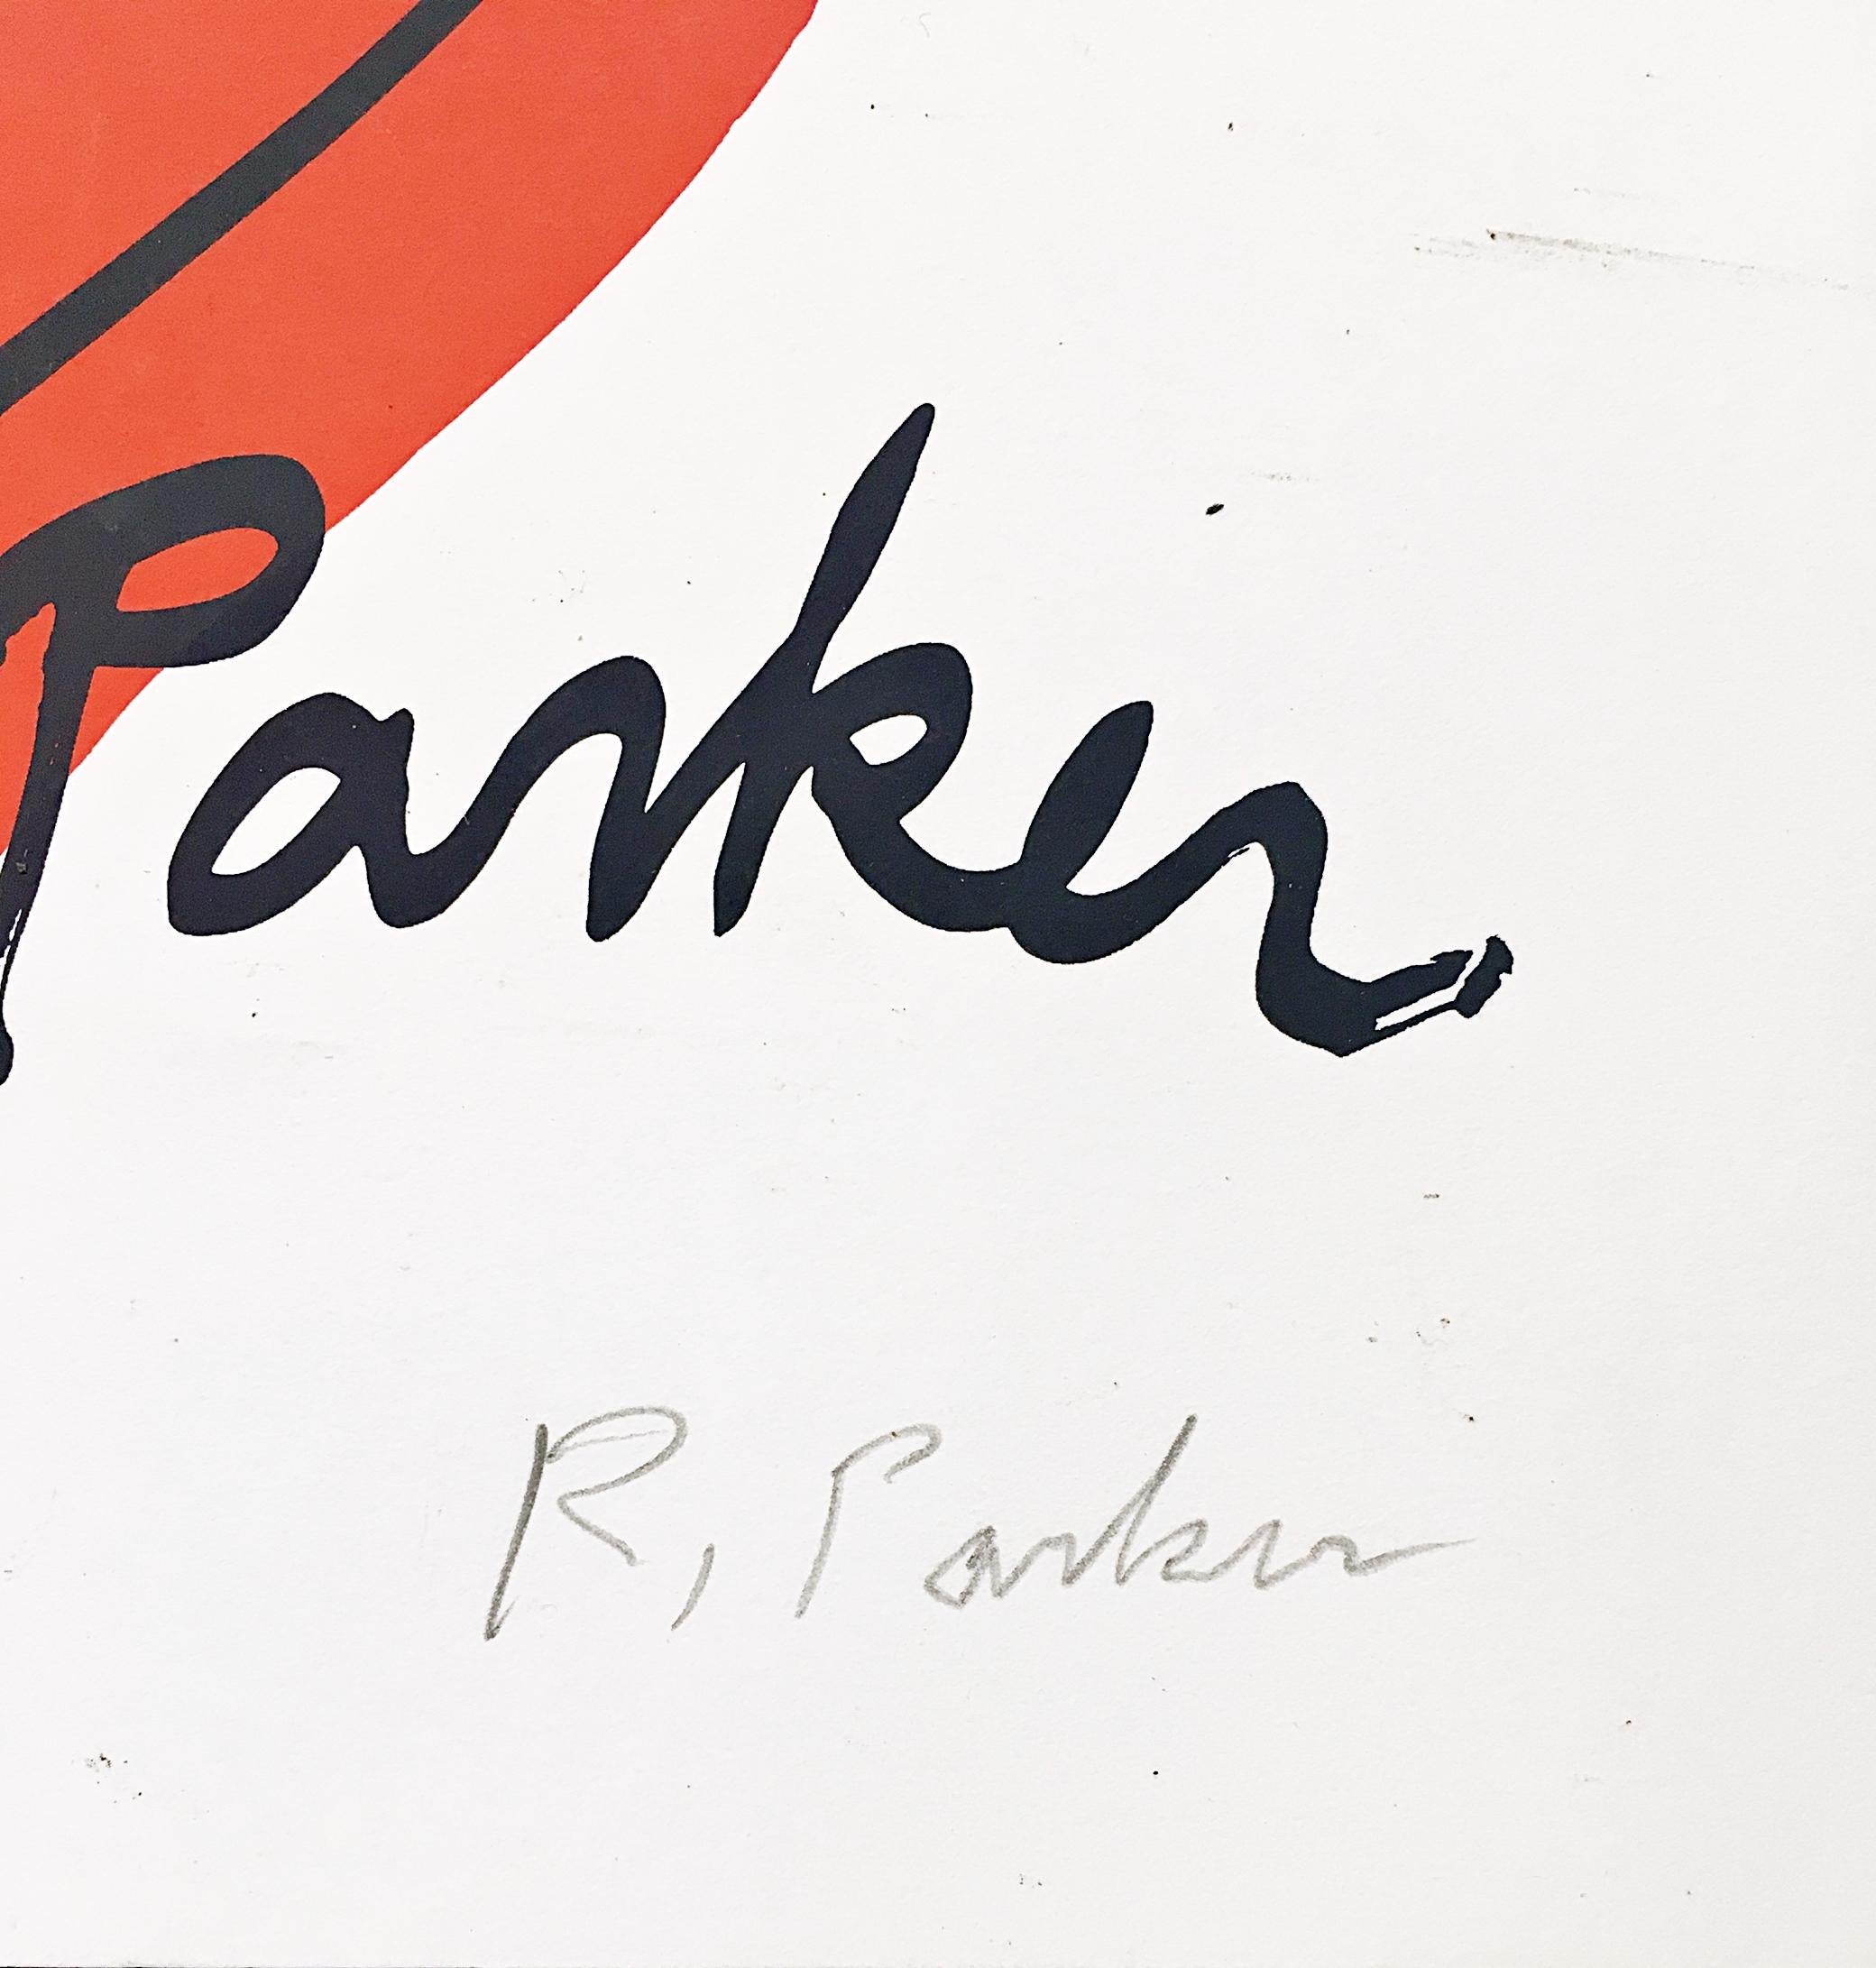 Raymond Parker (also known as Ray Parker)
1980s Art Dealers (Hand Signed by Raymond Parker), 1980
Rare Offset Lithograph Poster. Hand Signed in Pencil by Ray Parker
Hand signed by Ray Parker on the front
25 × 38 inches
Unframed
This is a collectible